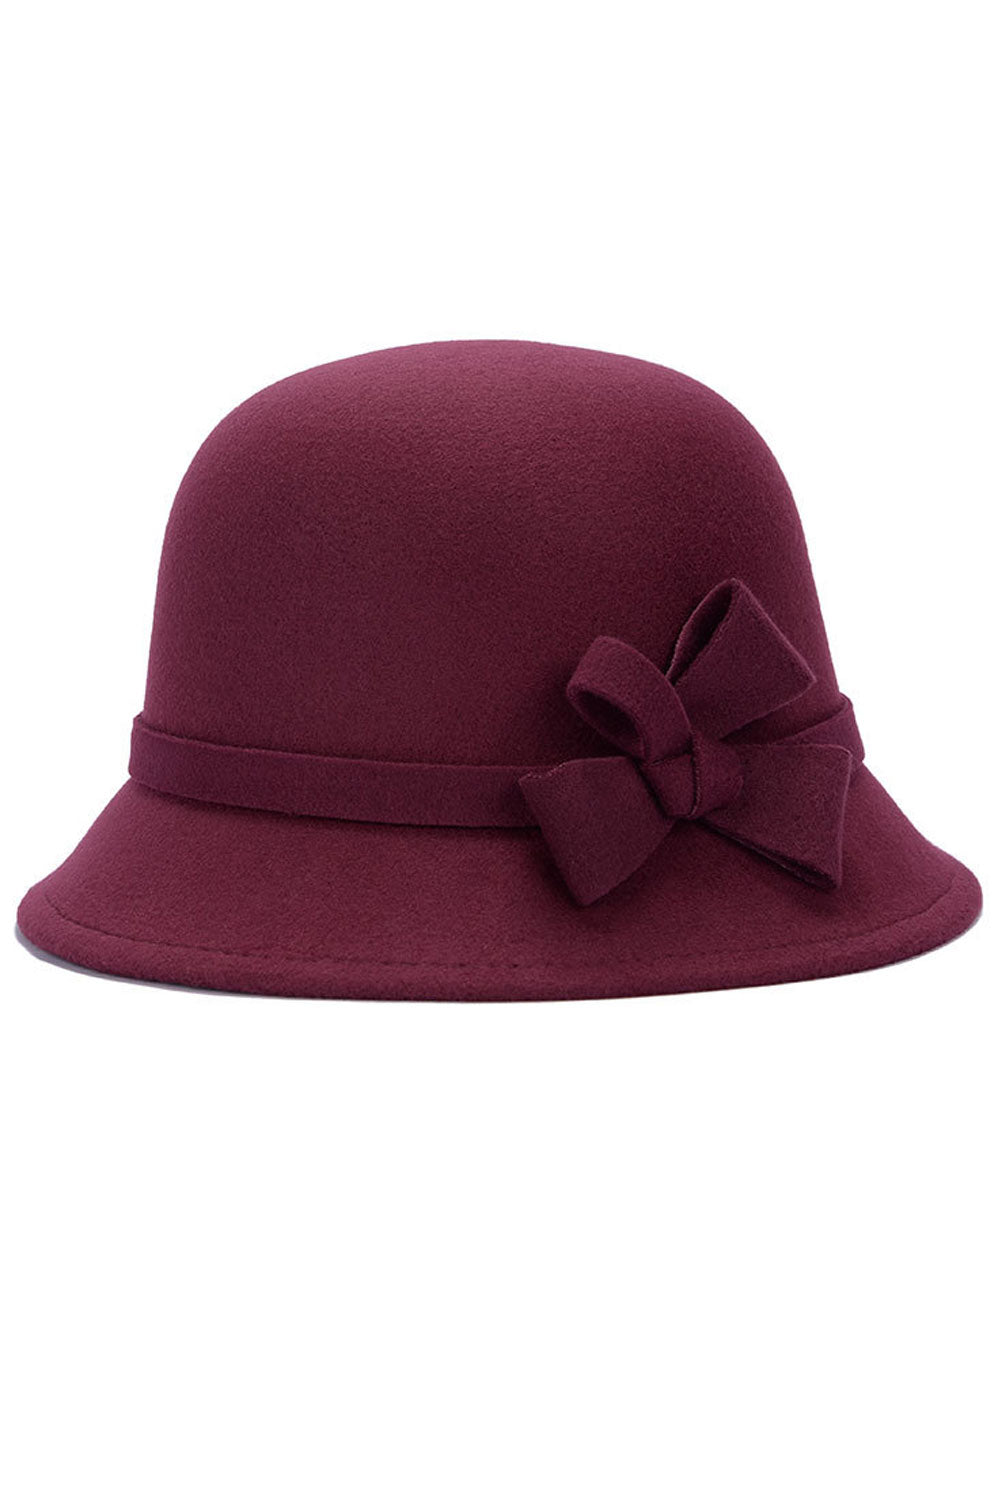 Women Trending Coldproof Bow Decorated Beautiful Beret Hat - WBH93874